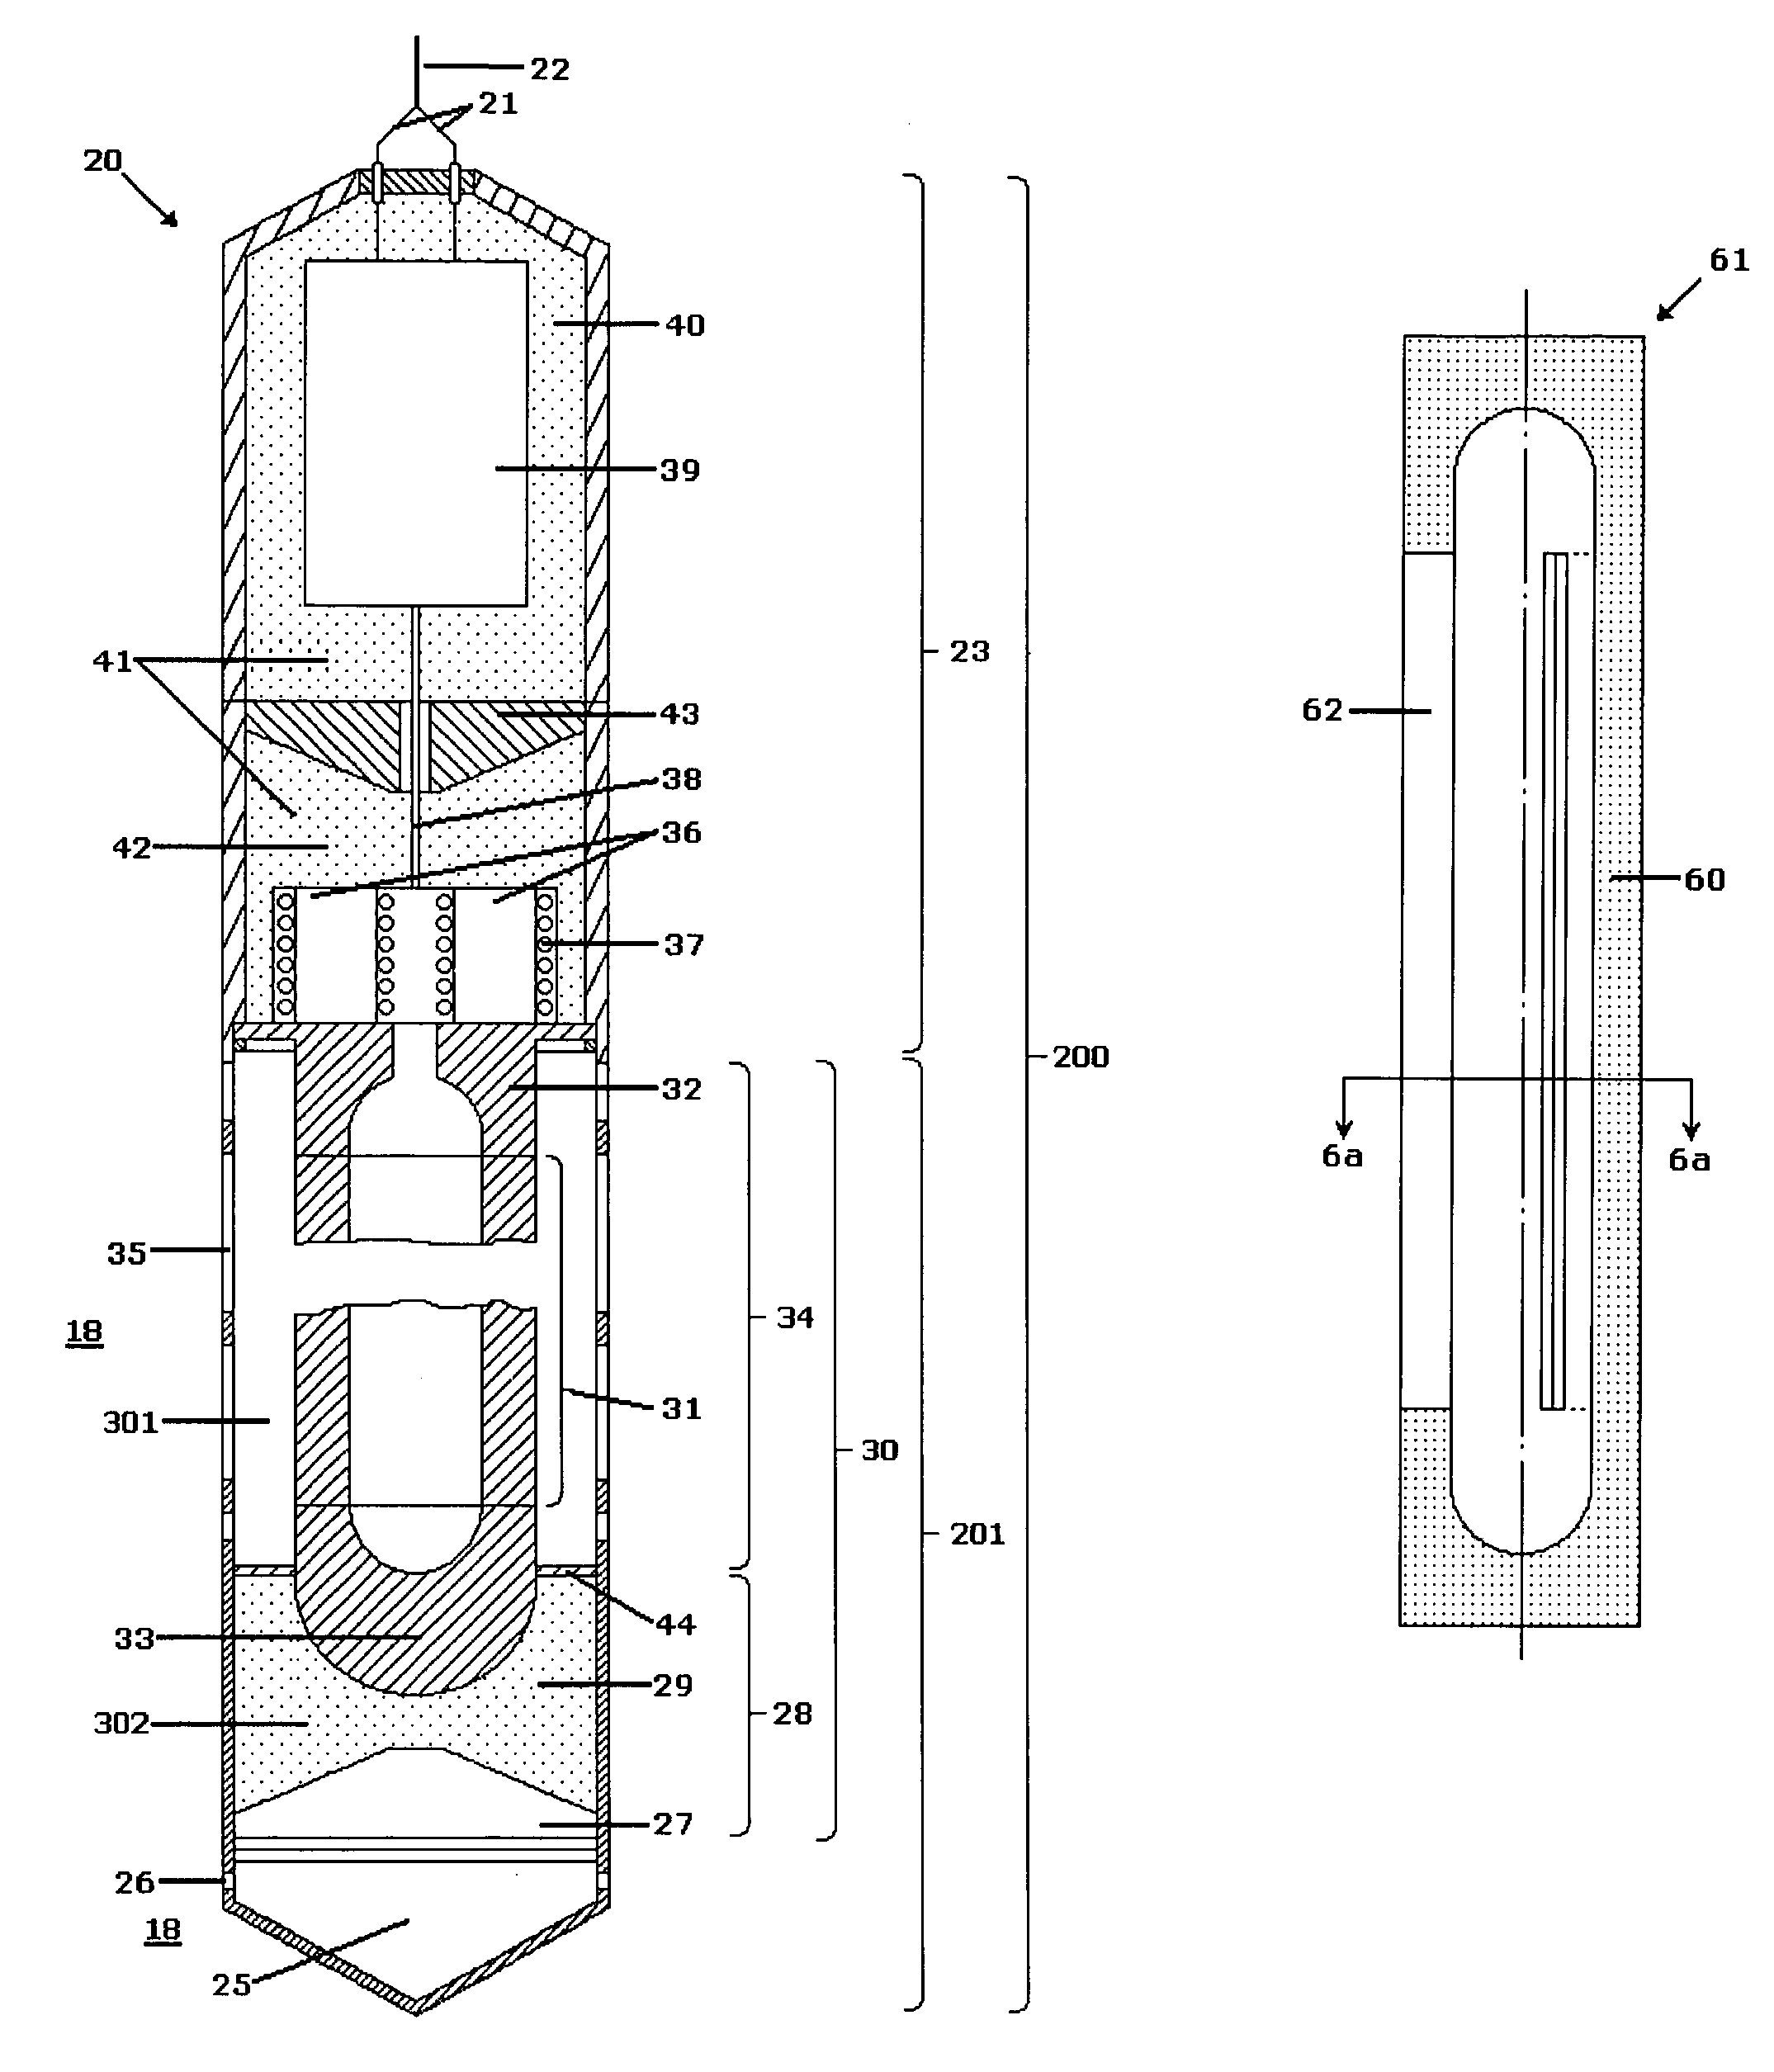 Acoustic well recovery method and device